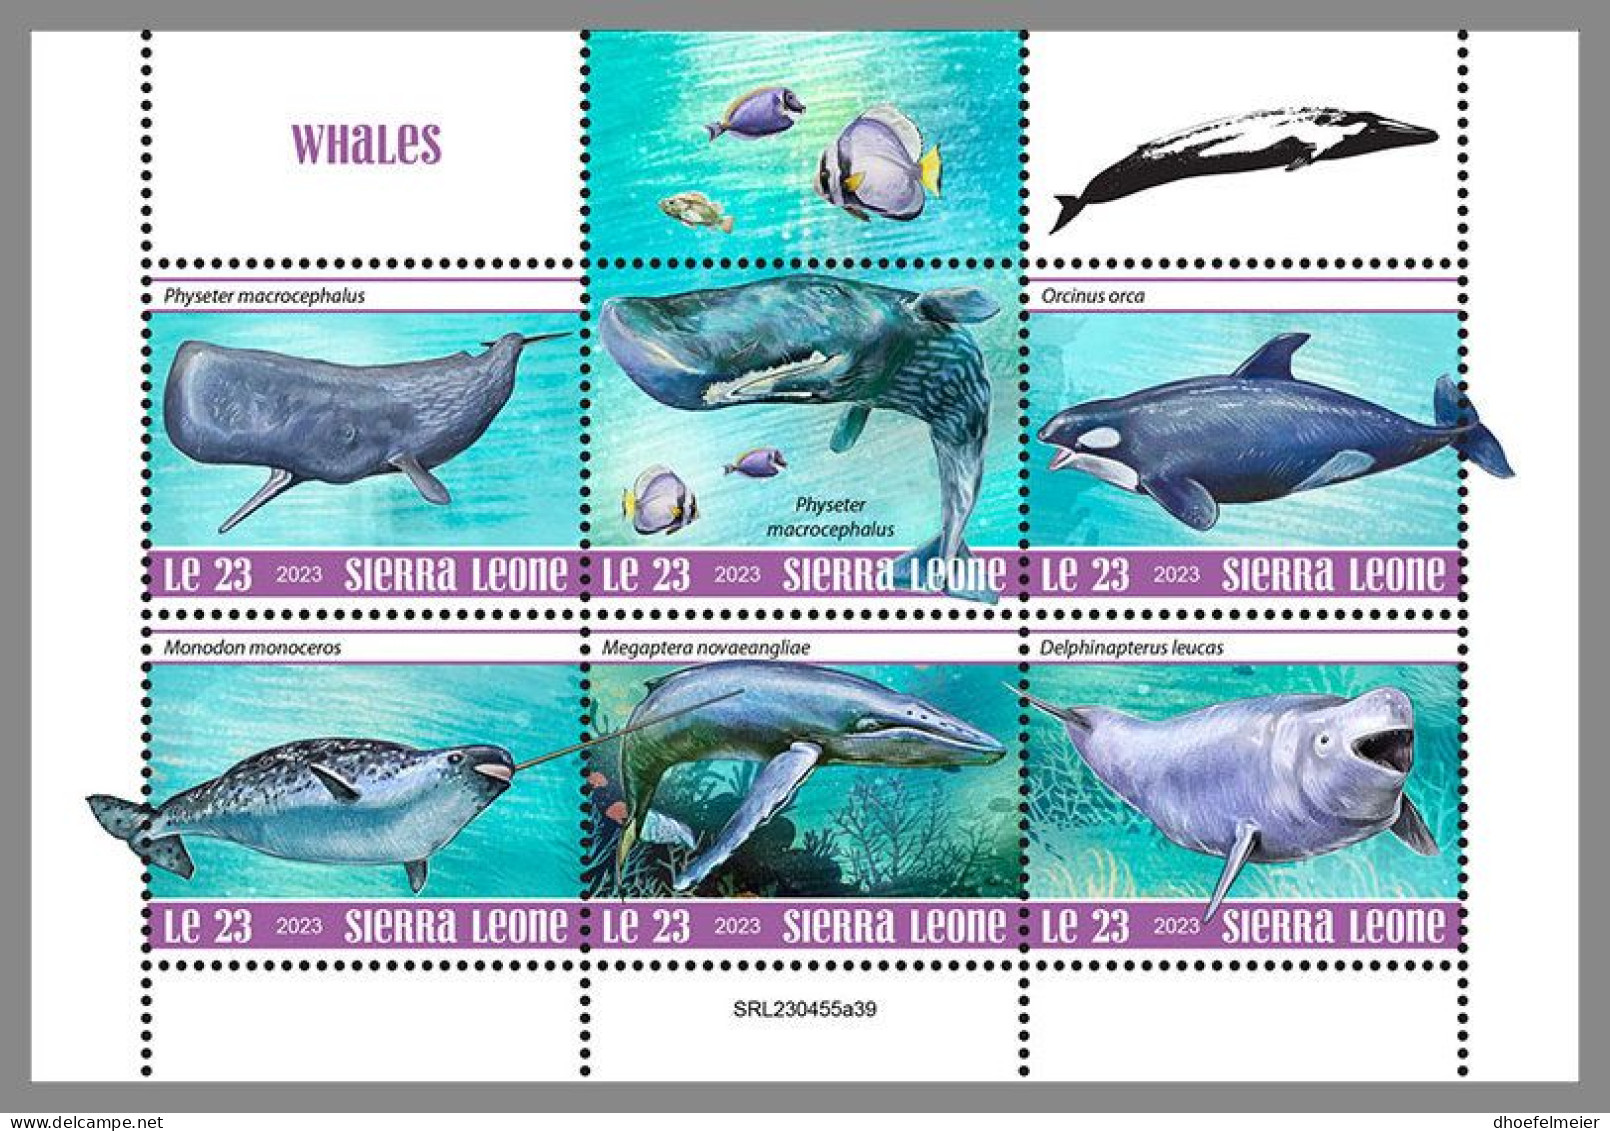 SIERRA LEONE 2023 MNH Whales Wale M/S – OFFICIAL ISSUE – DHQ2413 - Wale